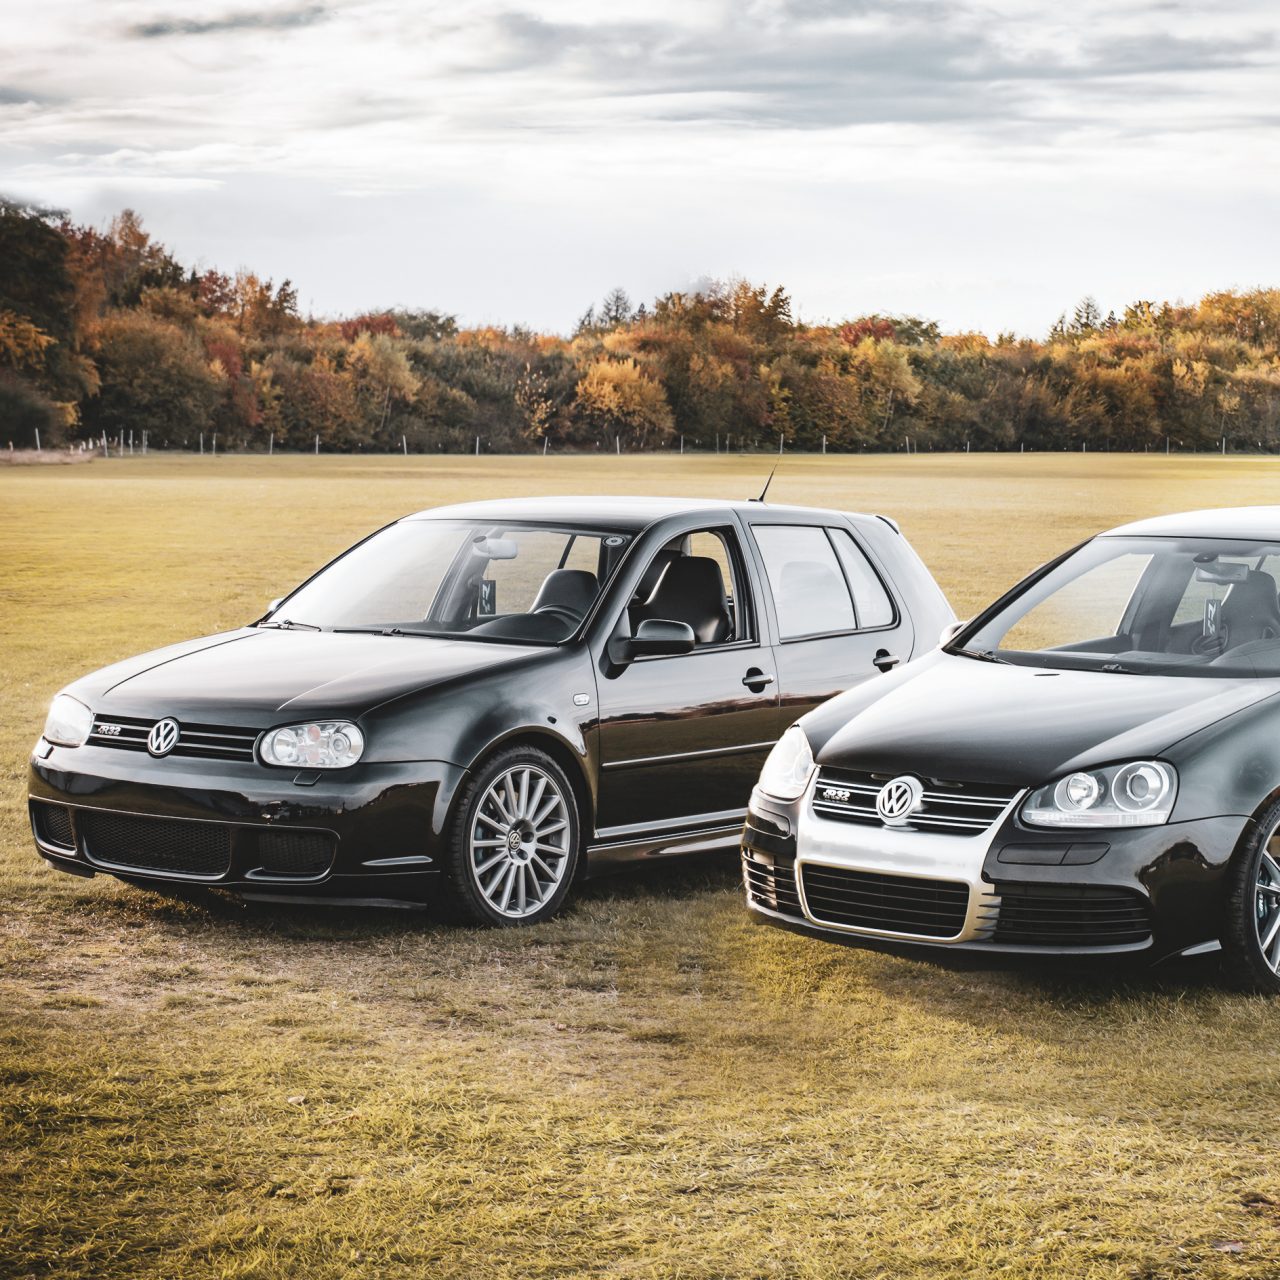 The Golf R32 celebrates its 20th anniversary. Discover matching VW Classic Parts now.